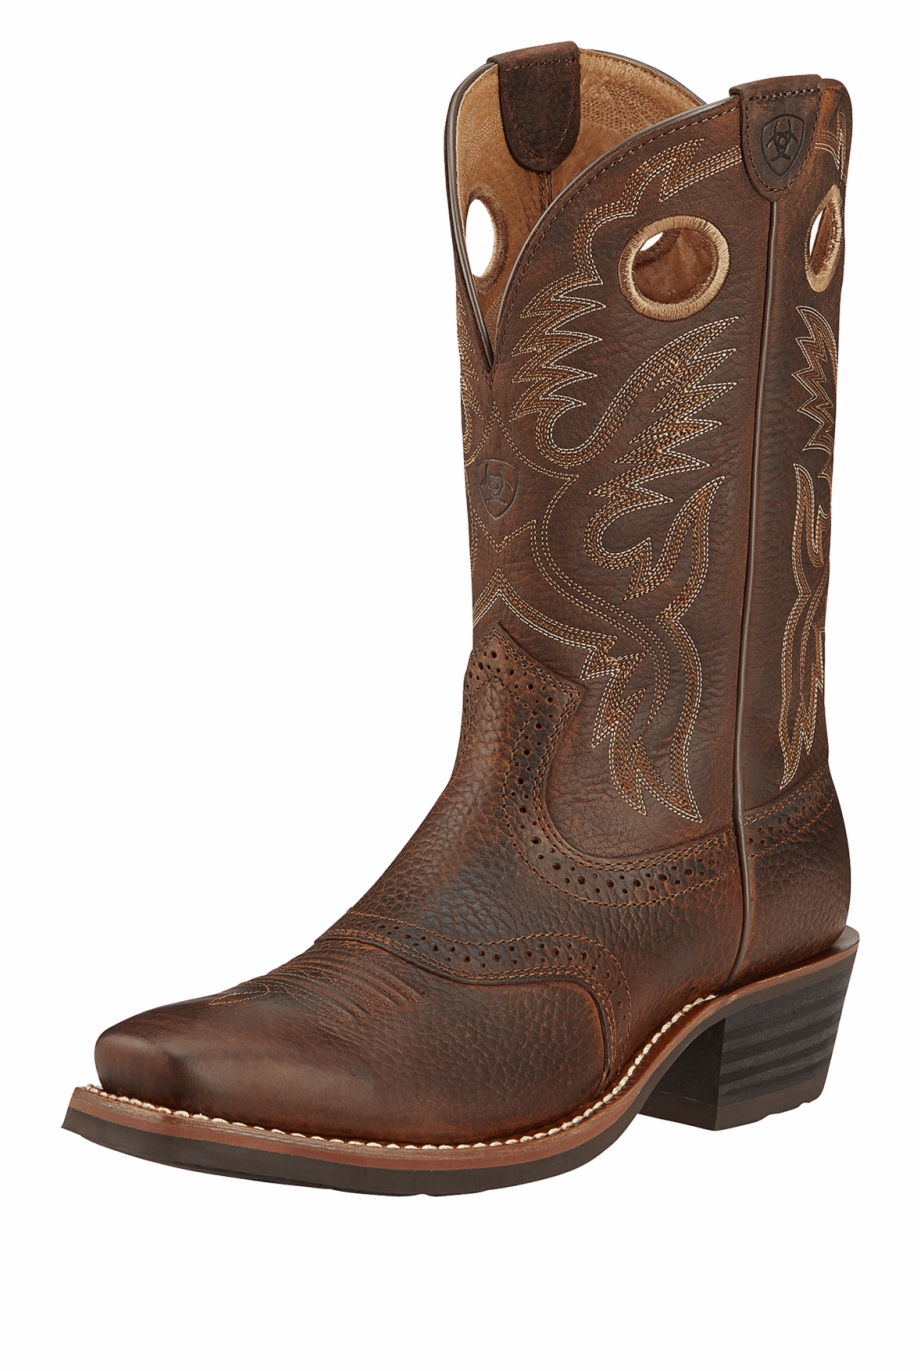 Cowboy Boots Png Ariat Roughstock Heritage Boots